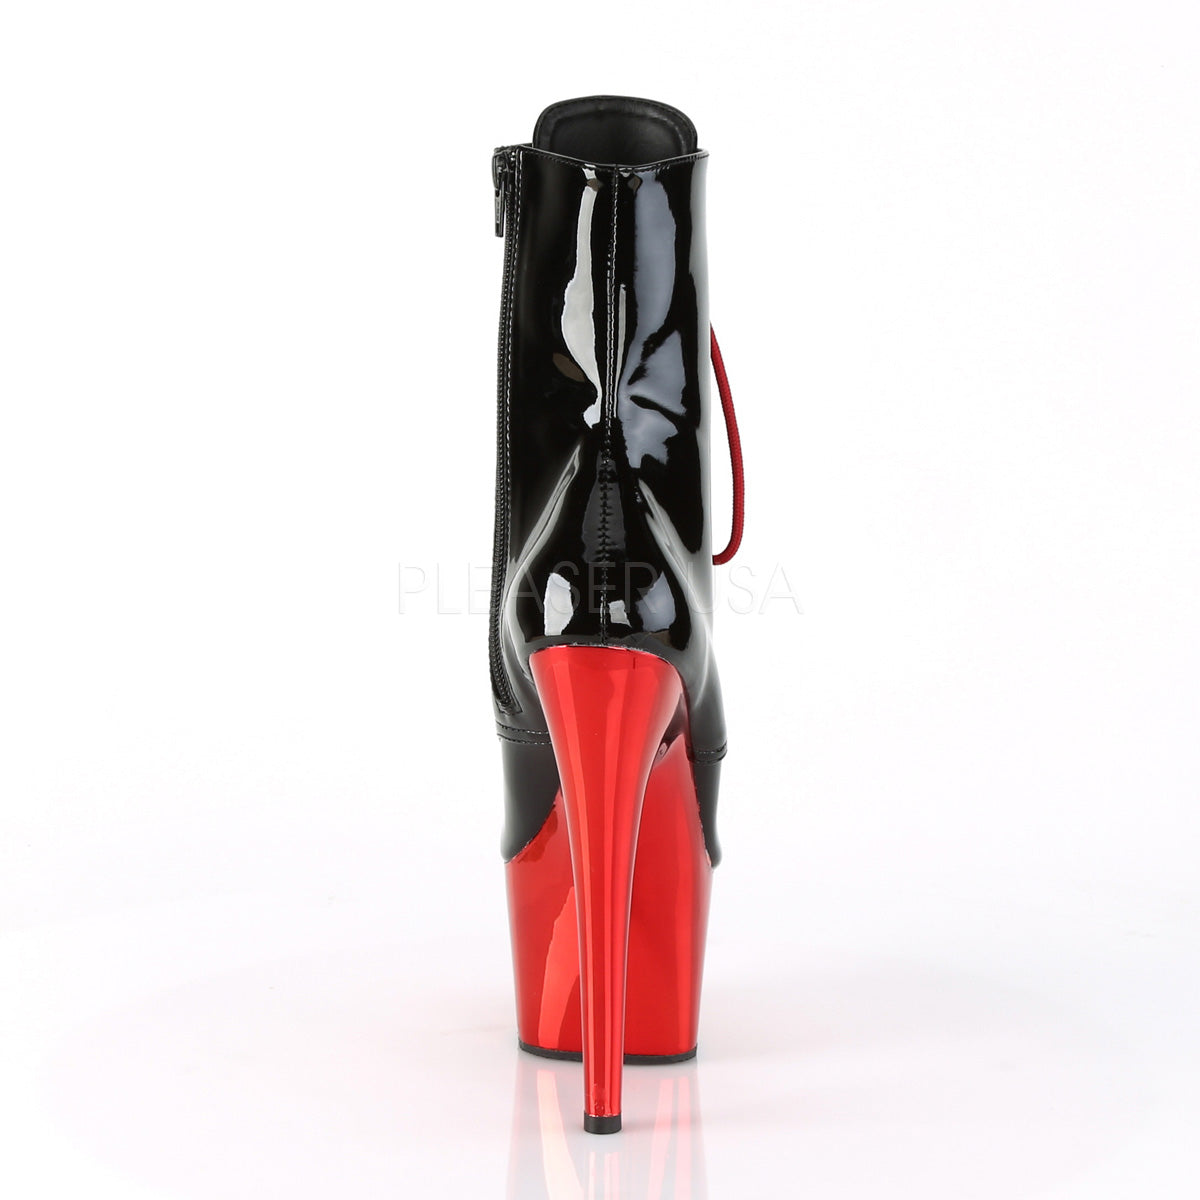 PLEASER Adore-1020 Red Rose Gold Chrome Lace Up Zip Ankle Calf 7" Platform Boots - A Shoe Addiction